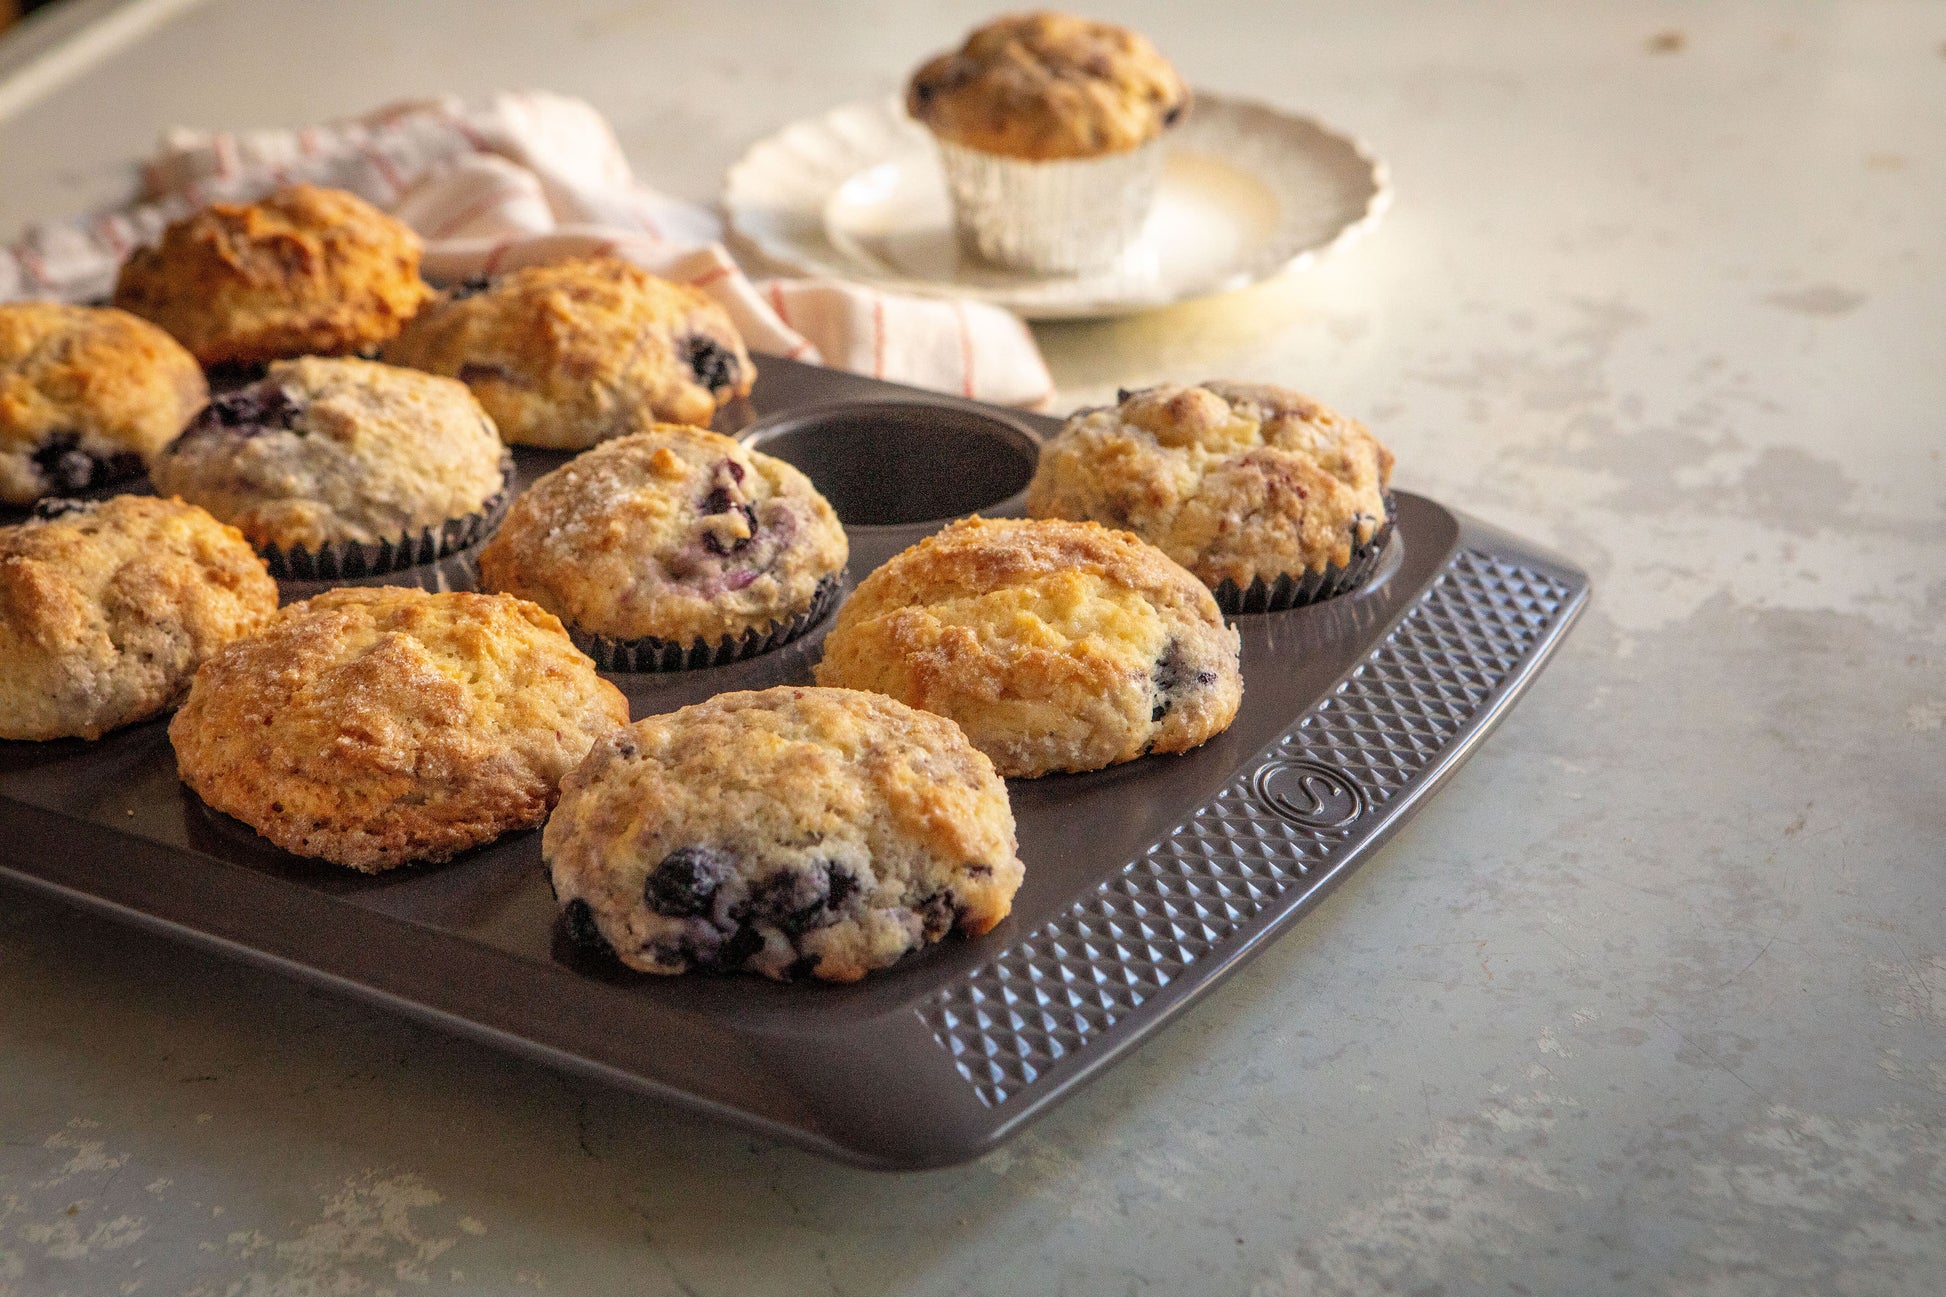 Cookie Sheets, Cake Pans, Muffin Pans, and Tins Shop